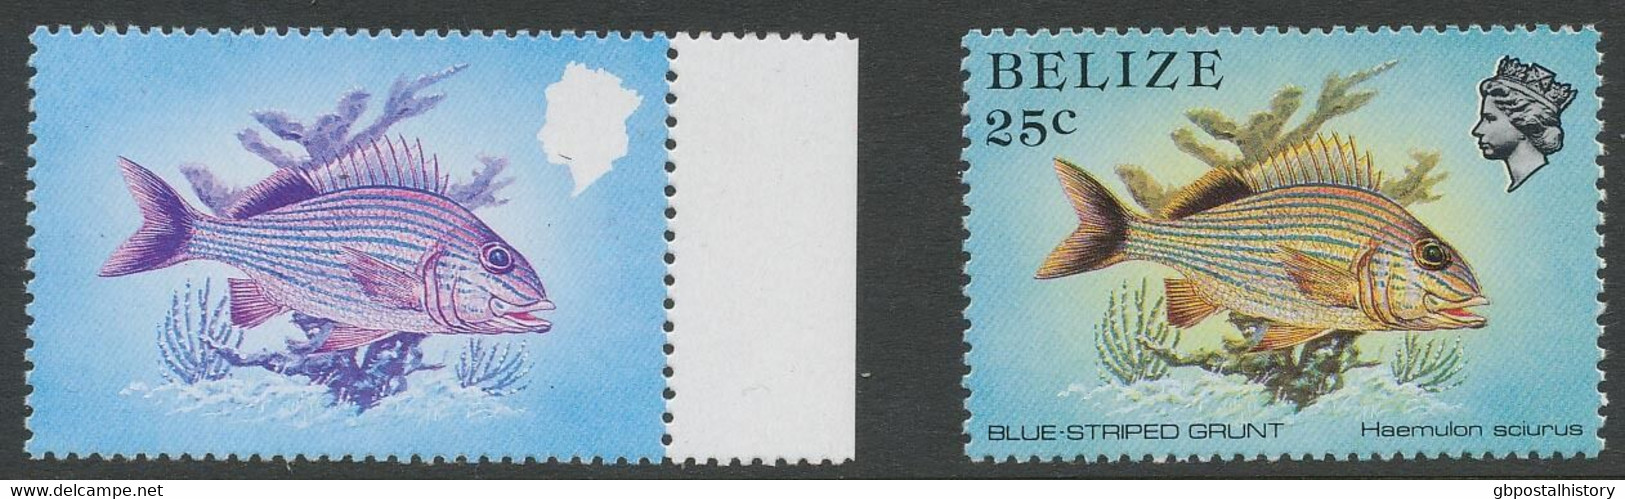 BELIZE 1984 25 C. Fish Superb U/M VARIETY: MSSING COLOURS BLACK AND YELLOW - Belice